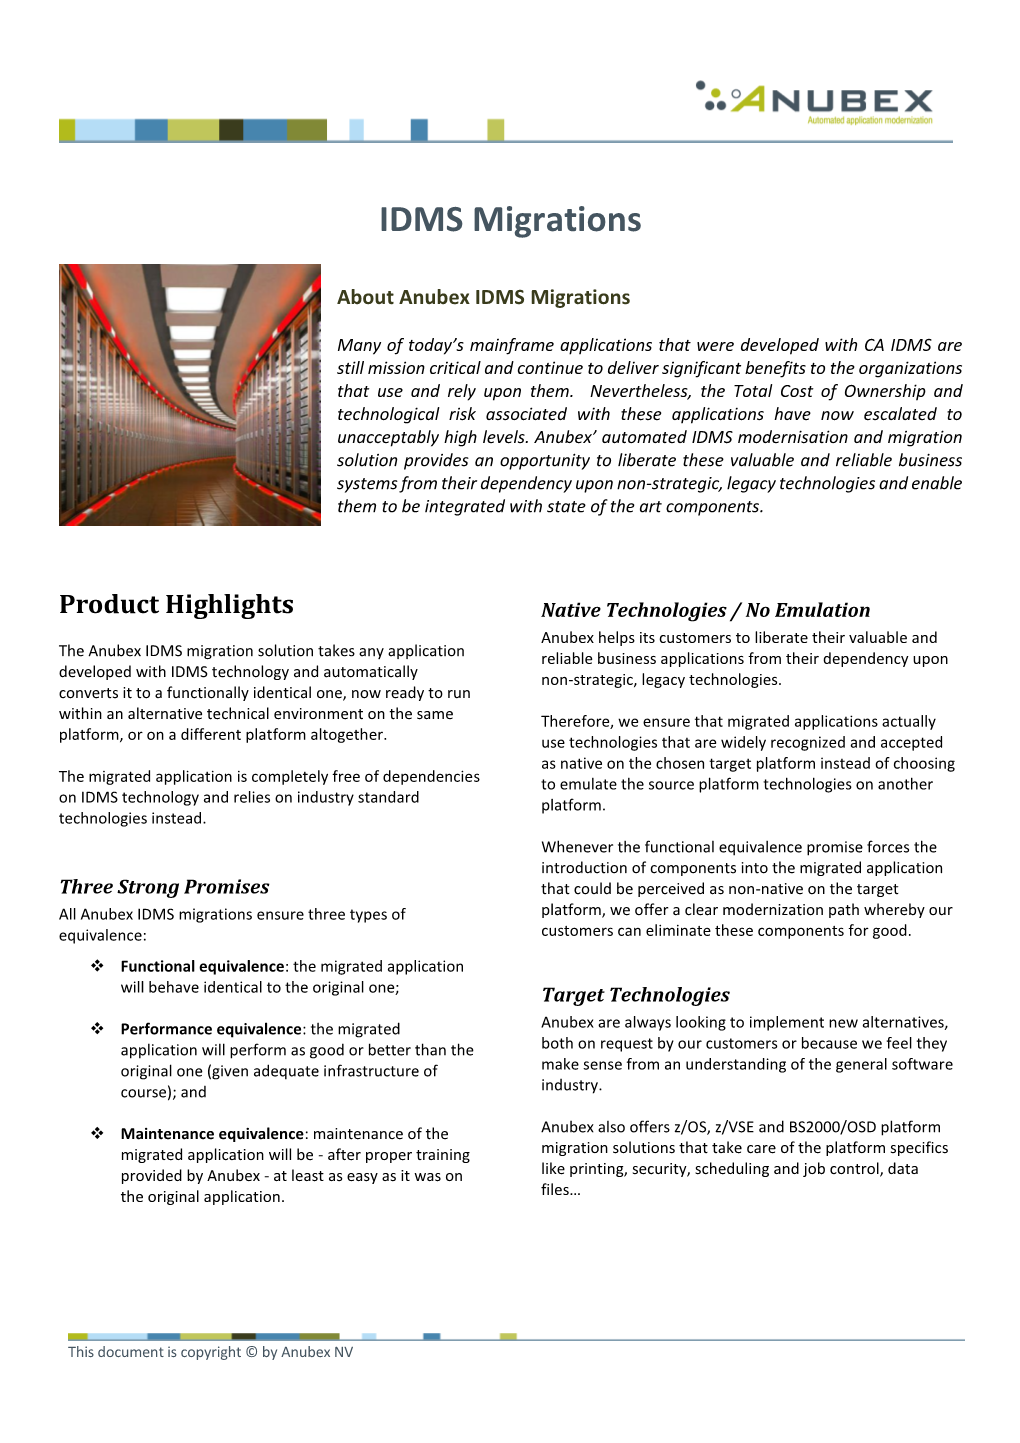 IDMS Migrations Product Sheet